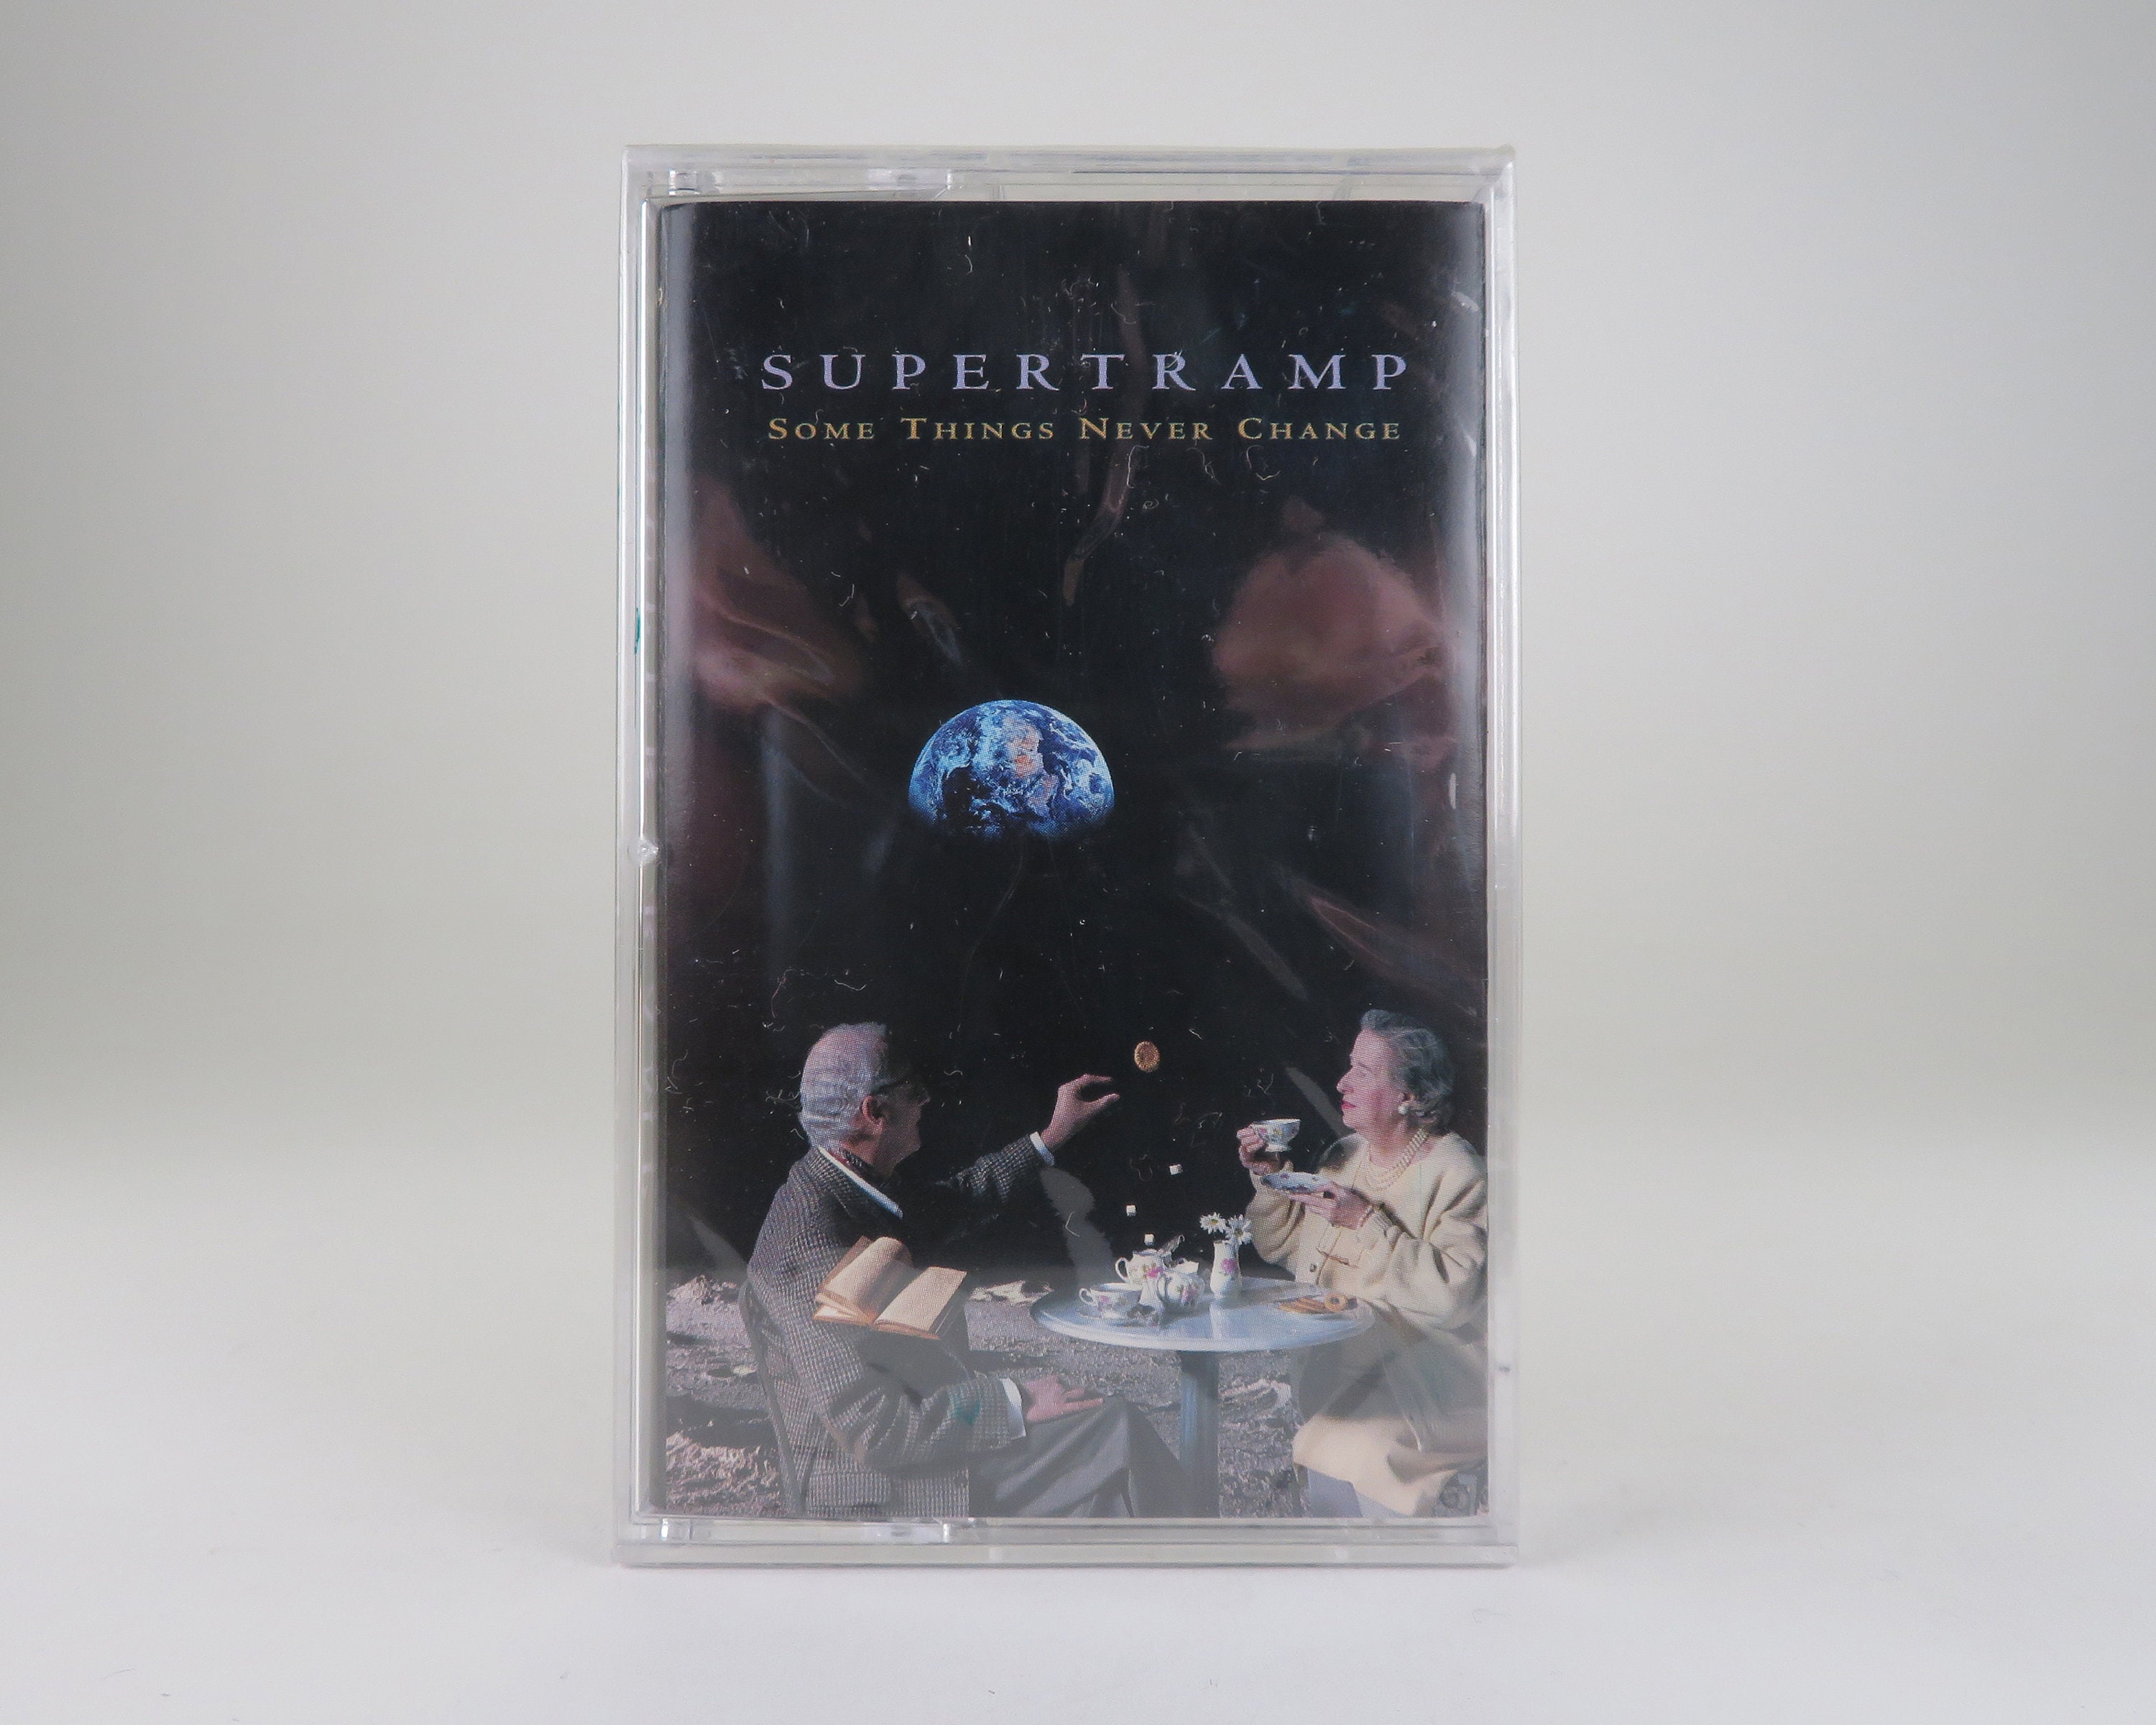 SUPERTRAMP Sealed Cassette Tape some Things Never Change 1997 